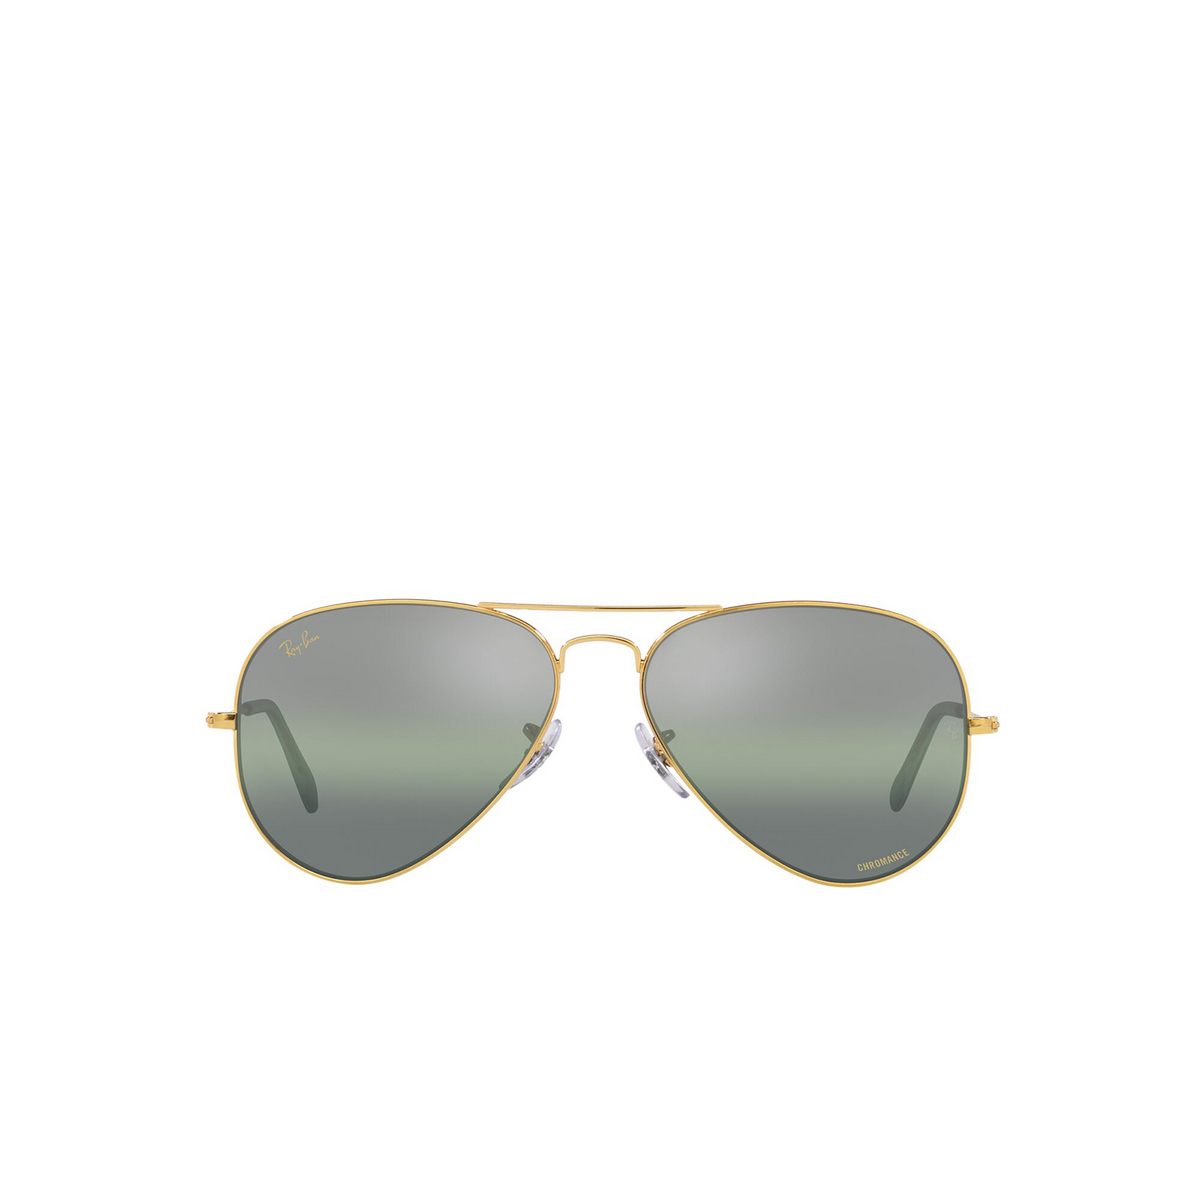 Ray-Ban AVIATOR LARGE METAL Sunglasses 9196G4 Legend Gold - front view